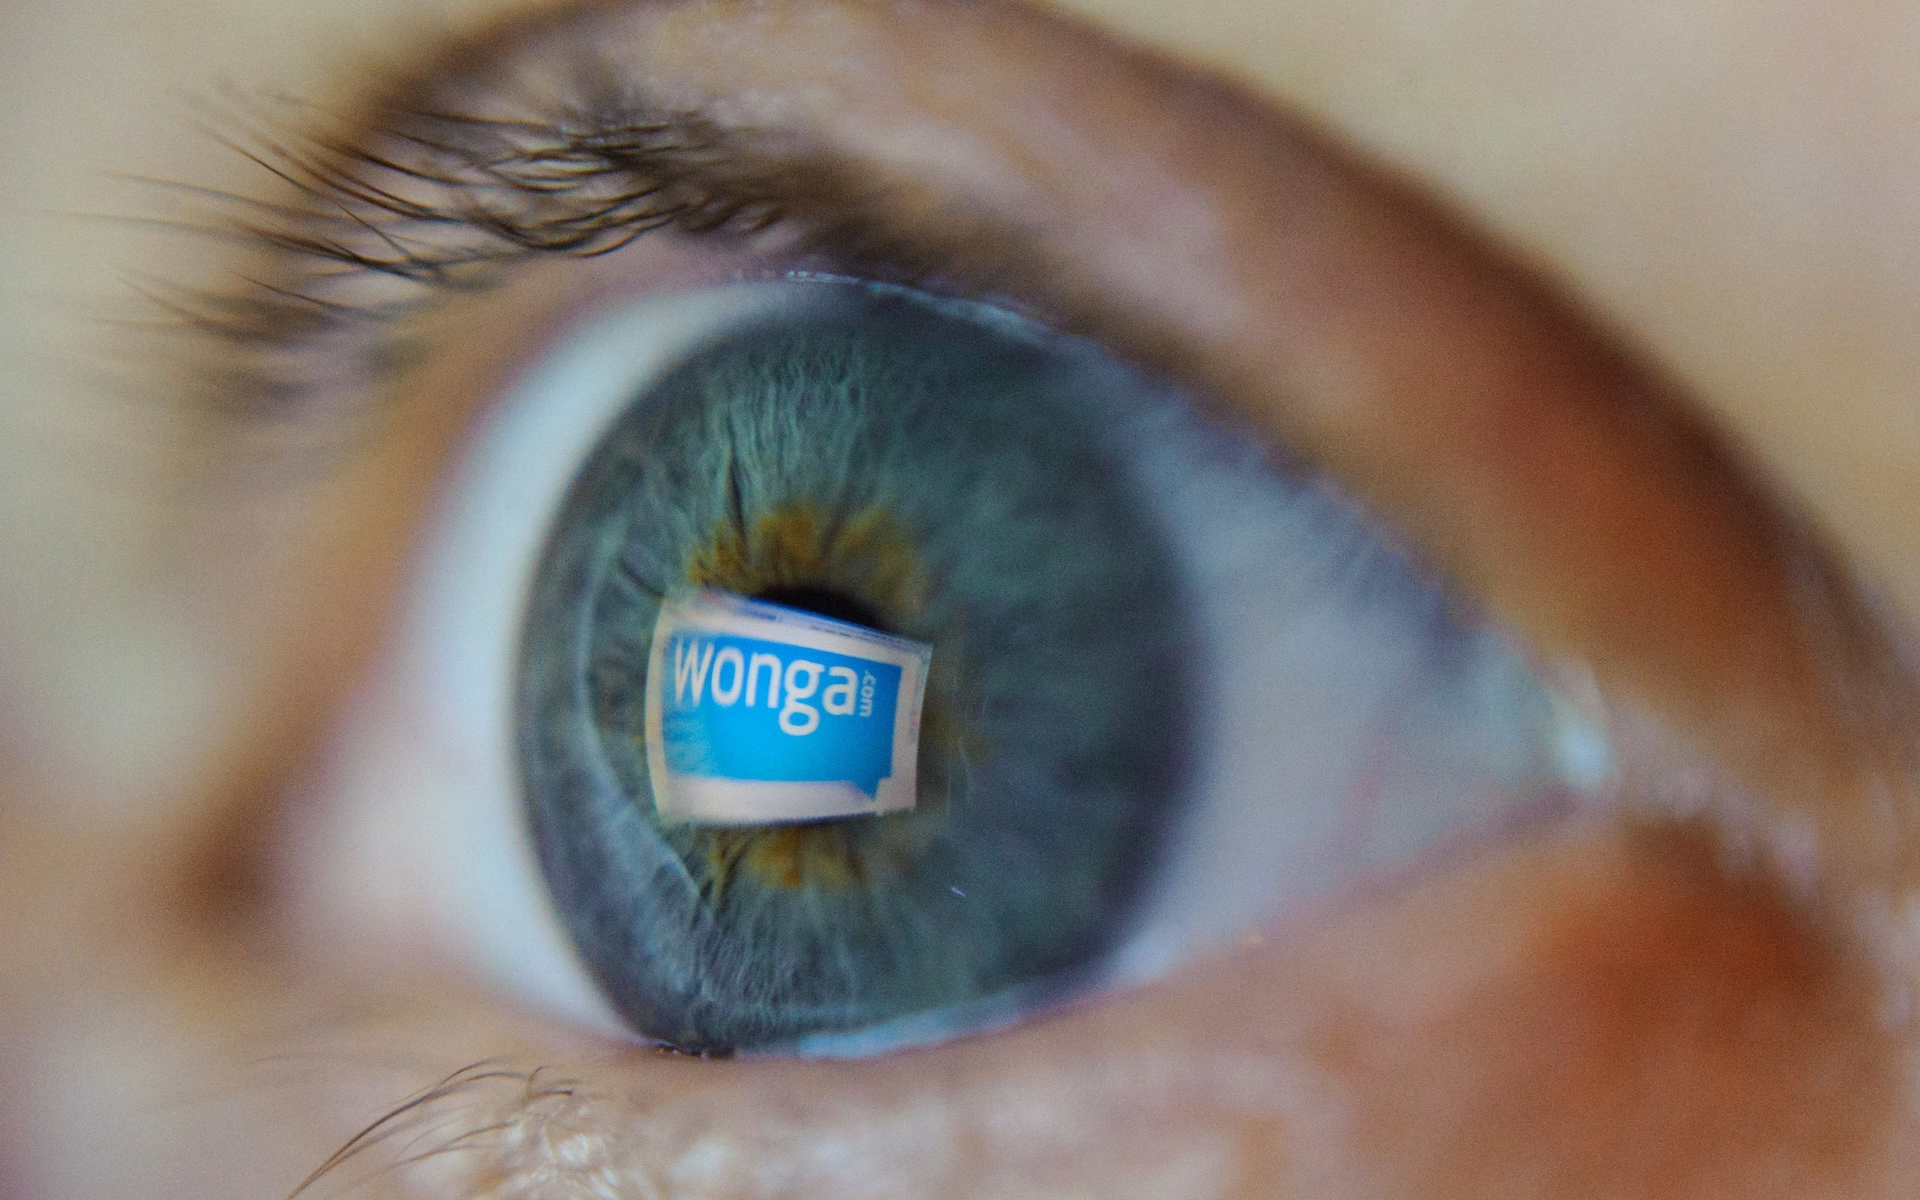 A close up of a person's blue eye with a Wonga logo reflected in it